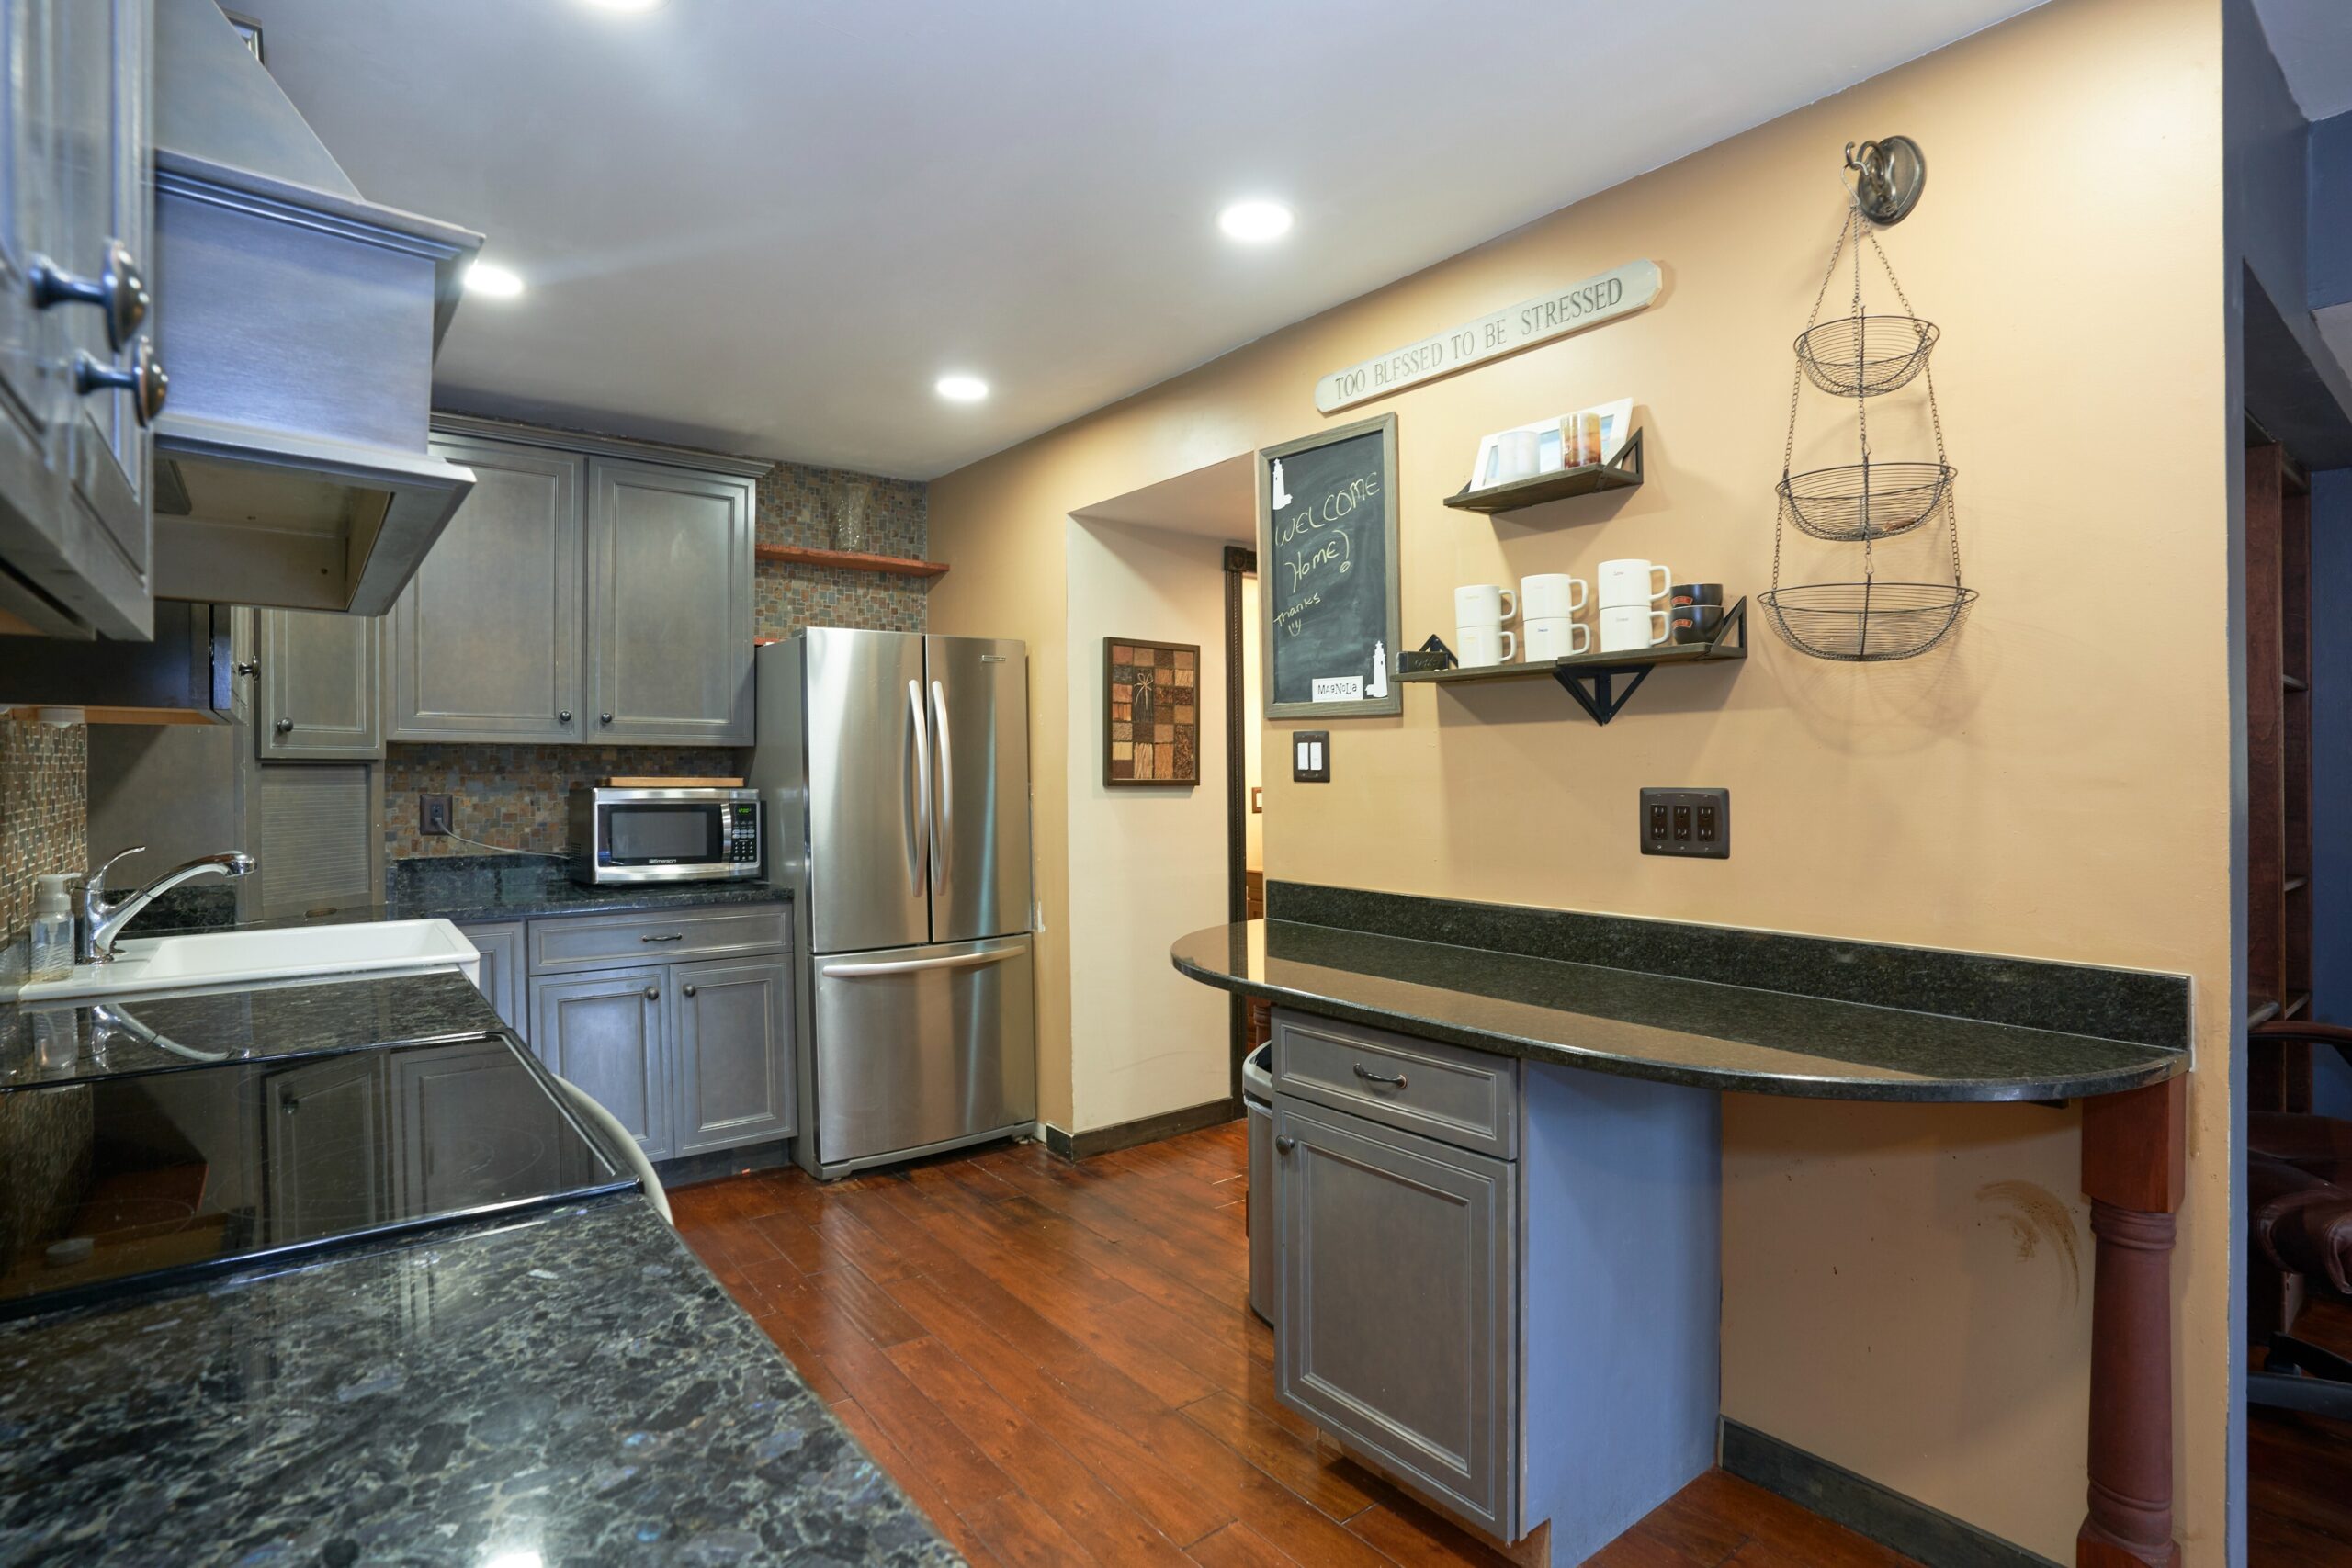 Professional interior photo of 10675 Spring Oak Ct - showing the kitchen with updated grey cabinets, dark granite countertops and non-island build against the wall for additional work and storage space